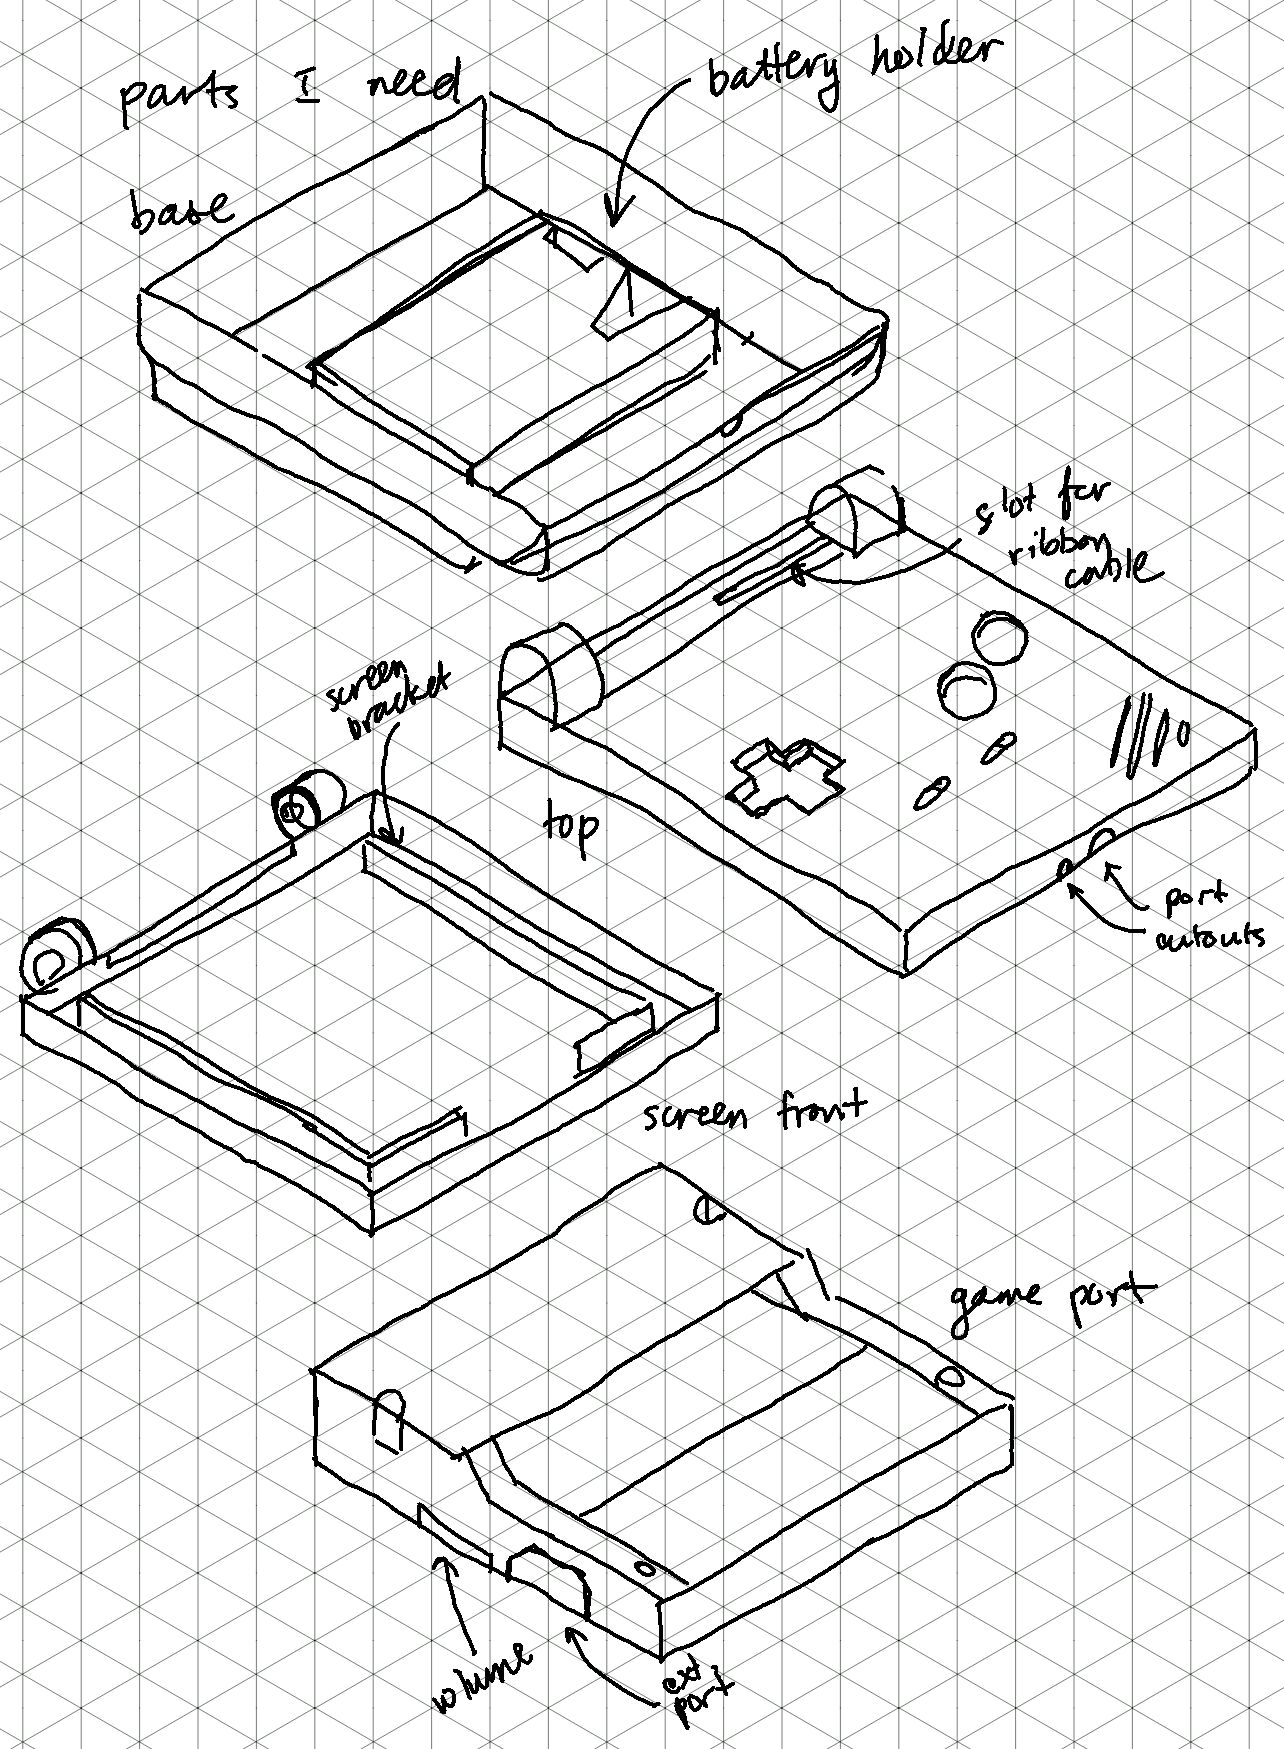 Sketch of various parts of the Pocket SP shell